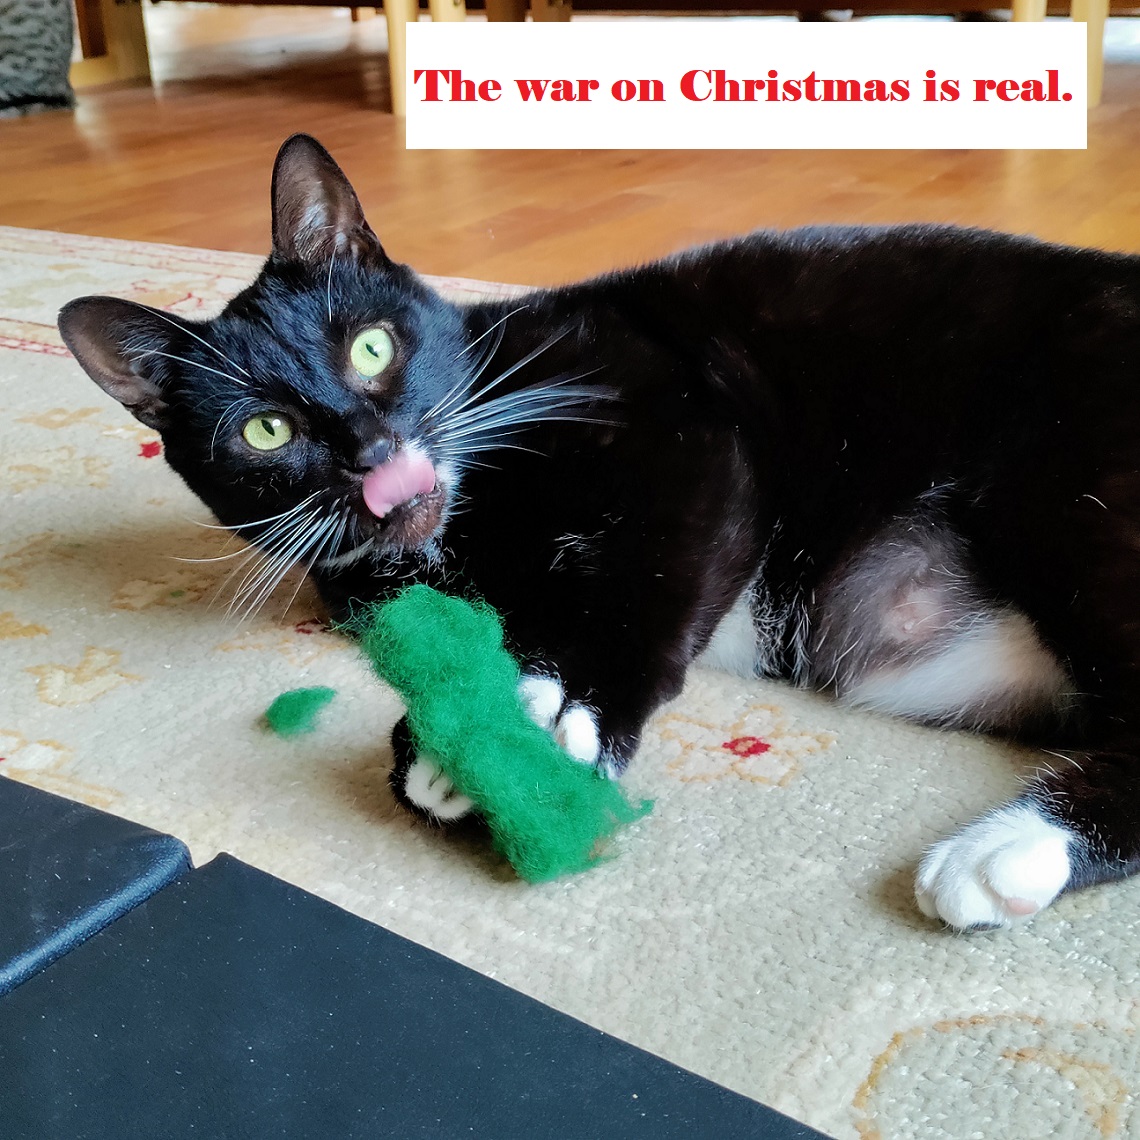 Photo of a Cat attacking a Christmas tree toy. The war on Christmas is real.